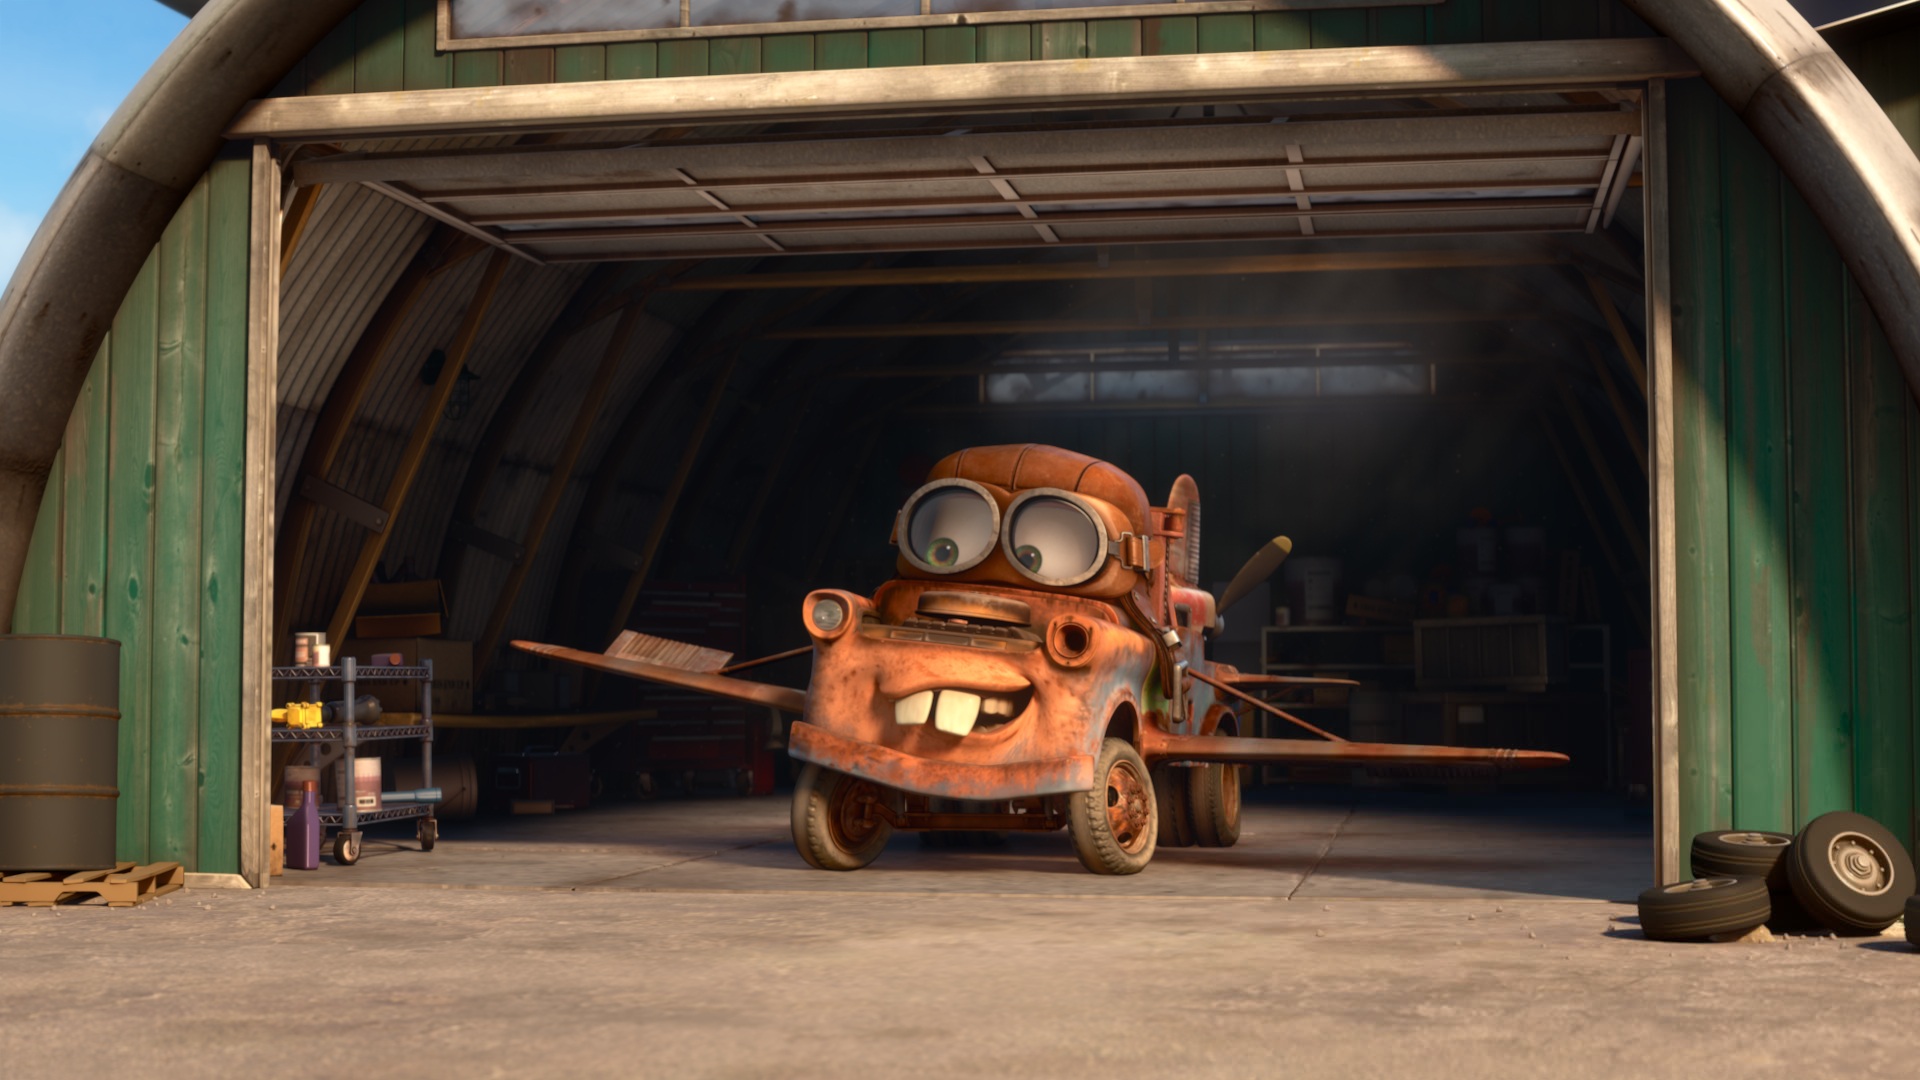 tv show, mater's tall tales